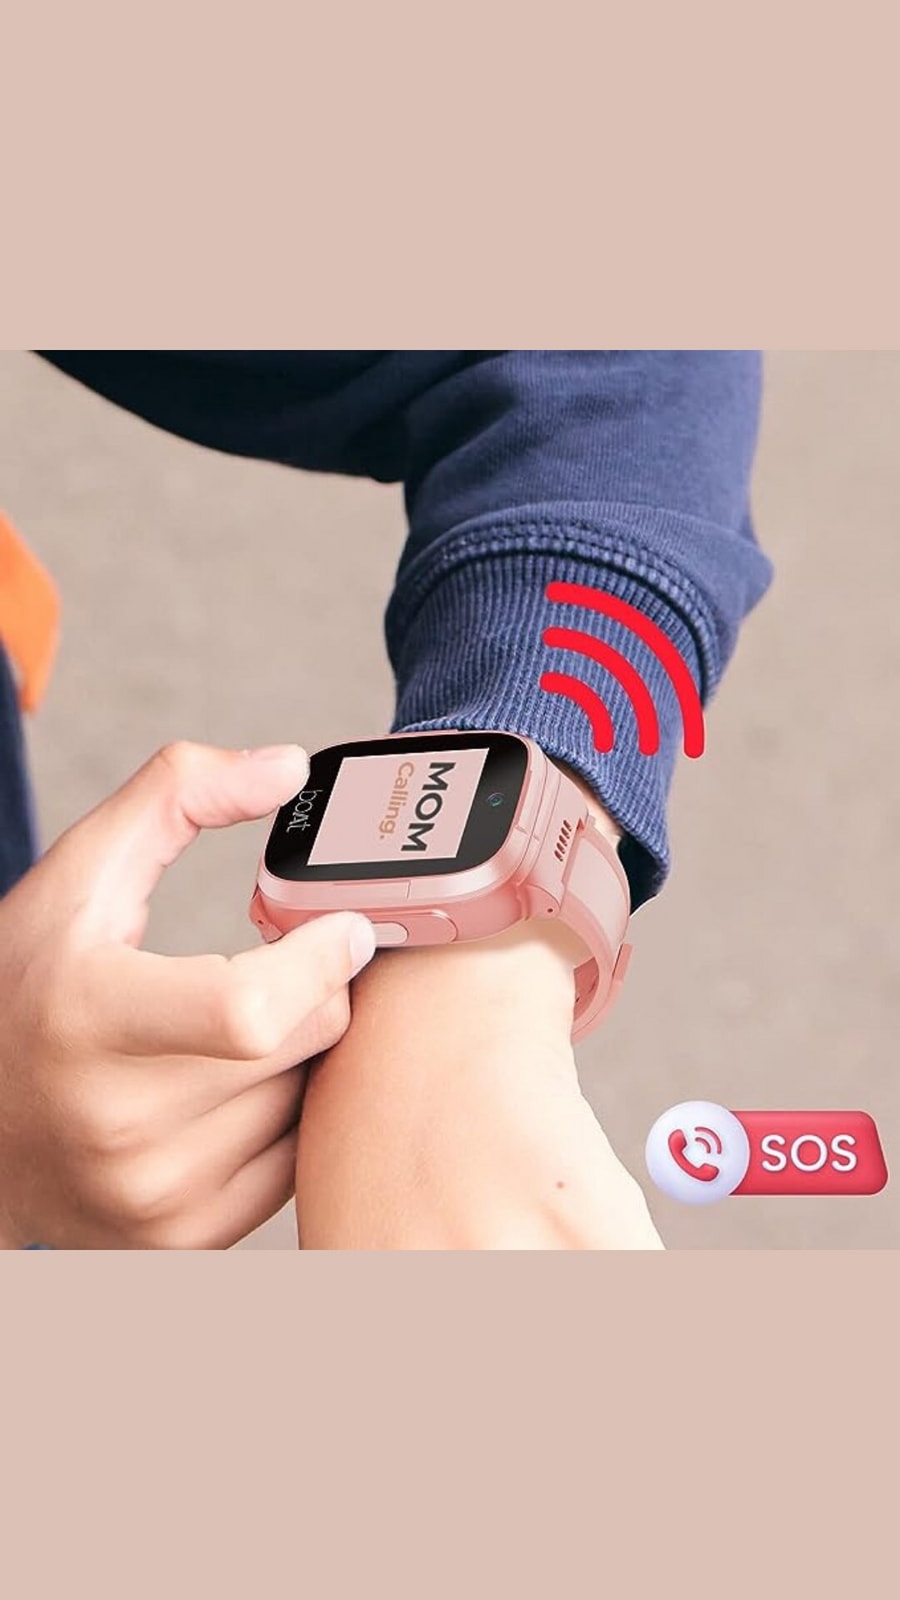 OAXIS - Our WatchPhone is now available at all Singtel Shops. Singtel is  the largest mobile network operators in Singapore with 4.1 million  subscribers. Check it out: https://shop.oaxis.com/collections/wearables/products/watchphone  | Facebook